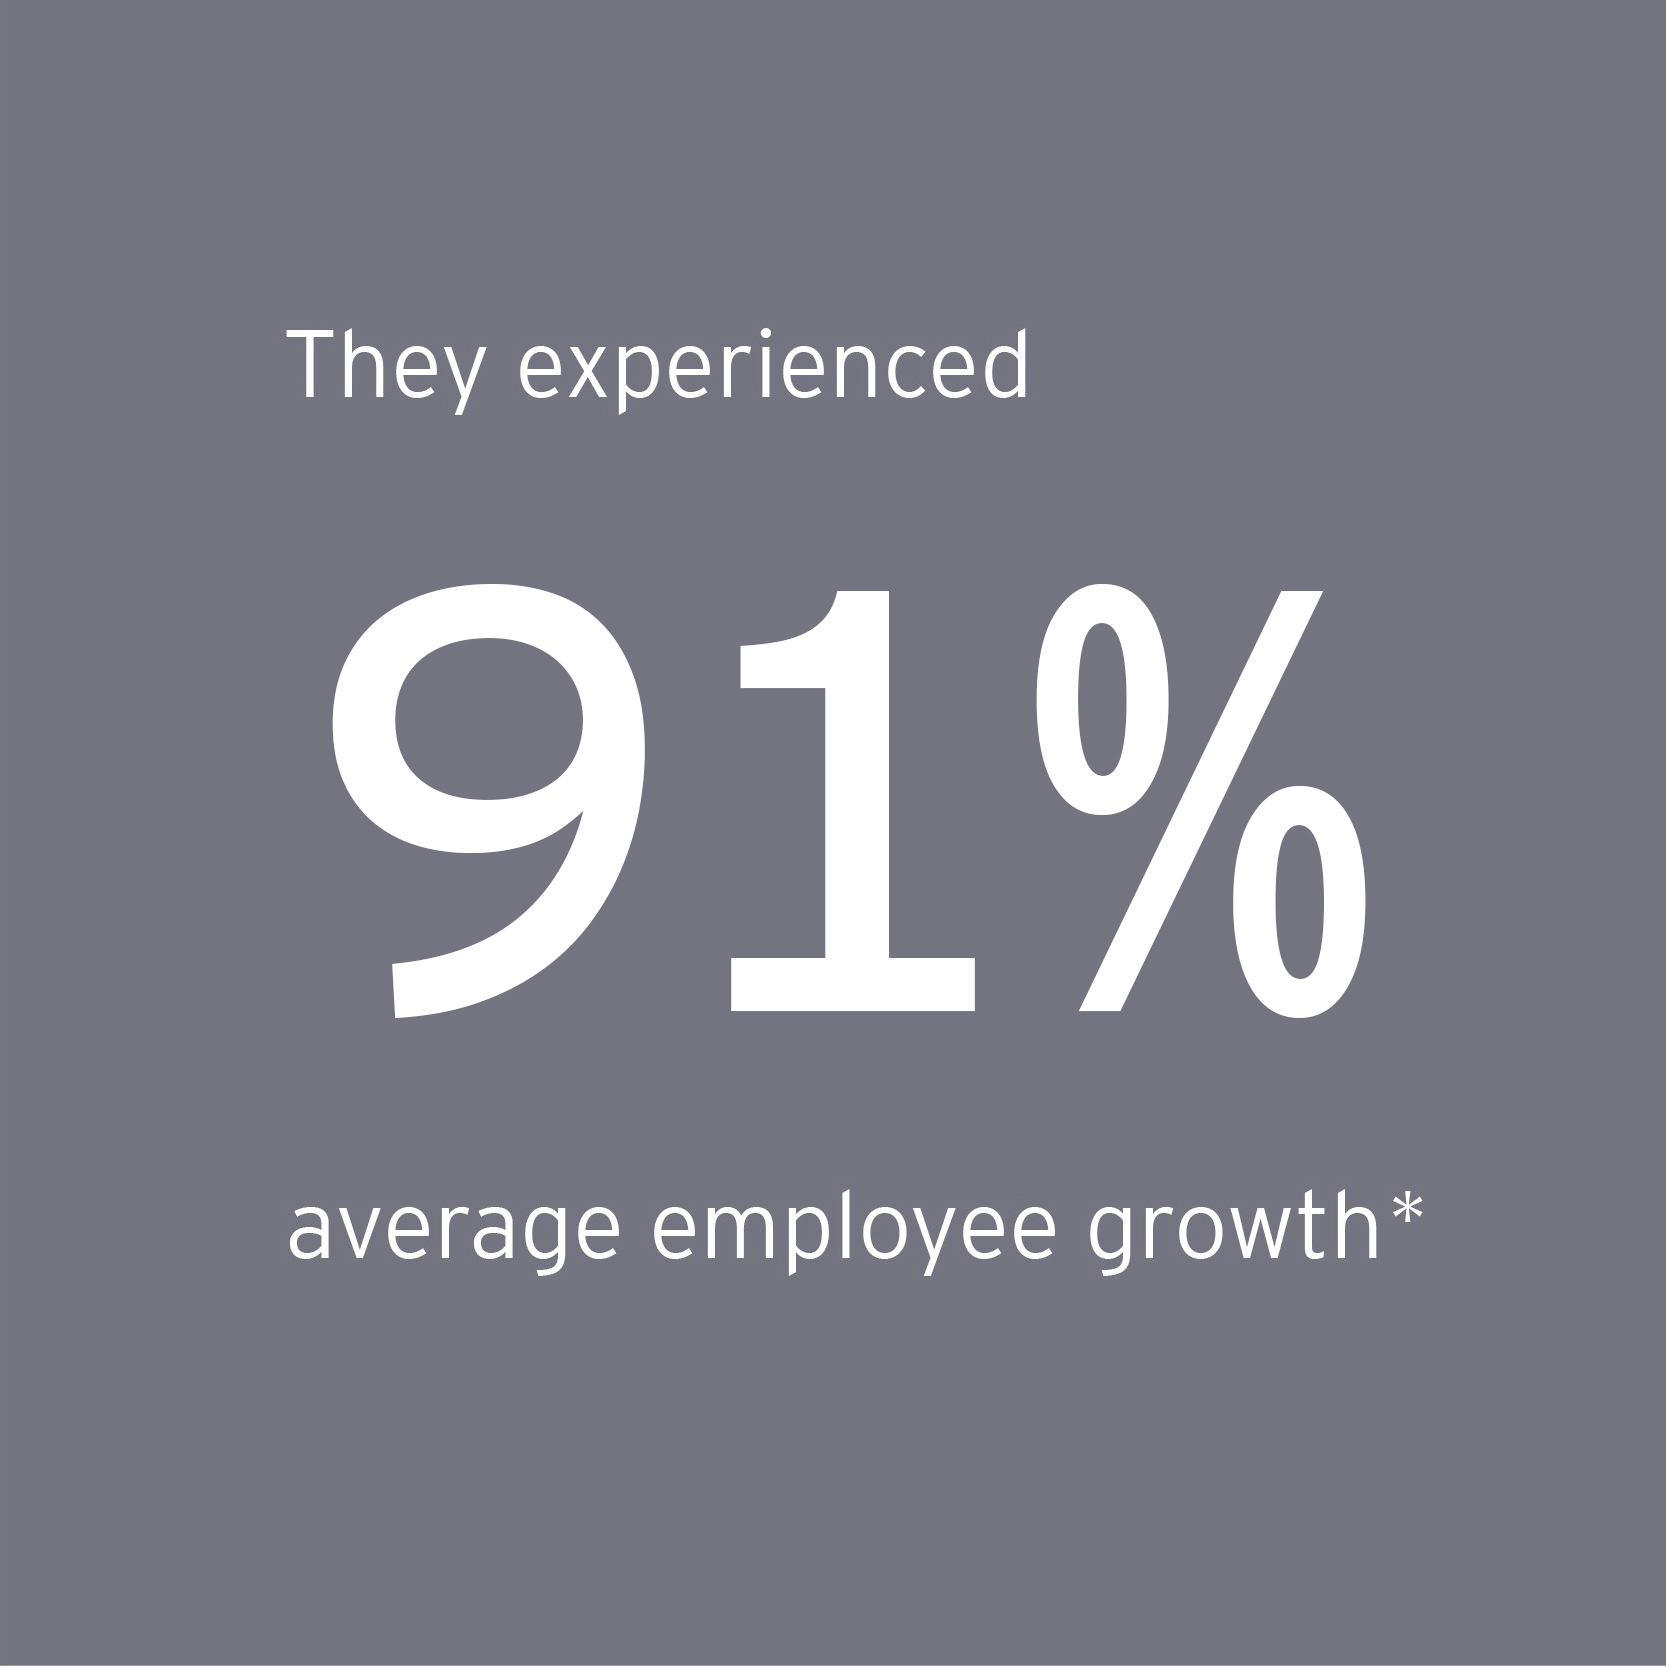 EOY Gulf South finalists experienced 91% average employee growth